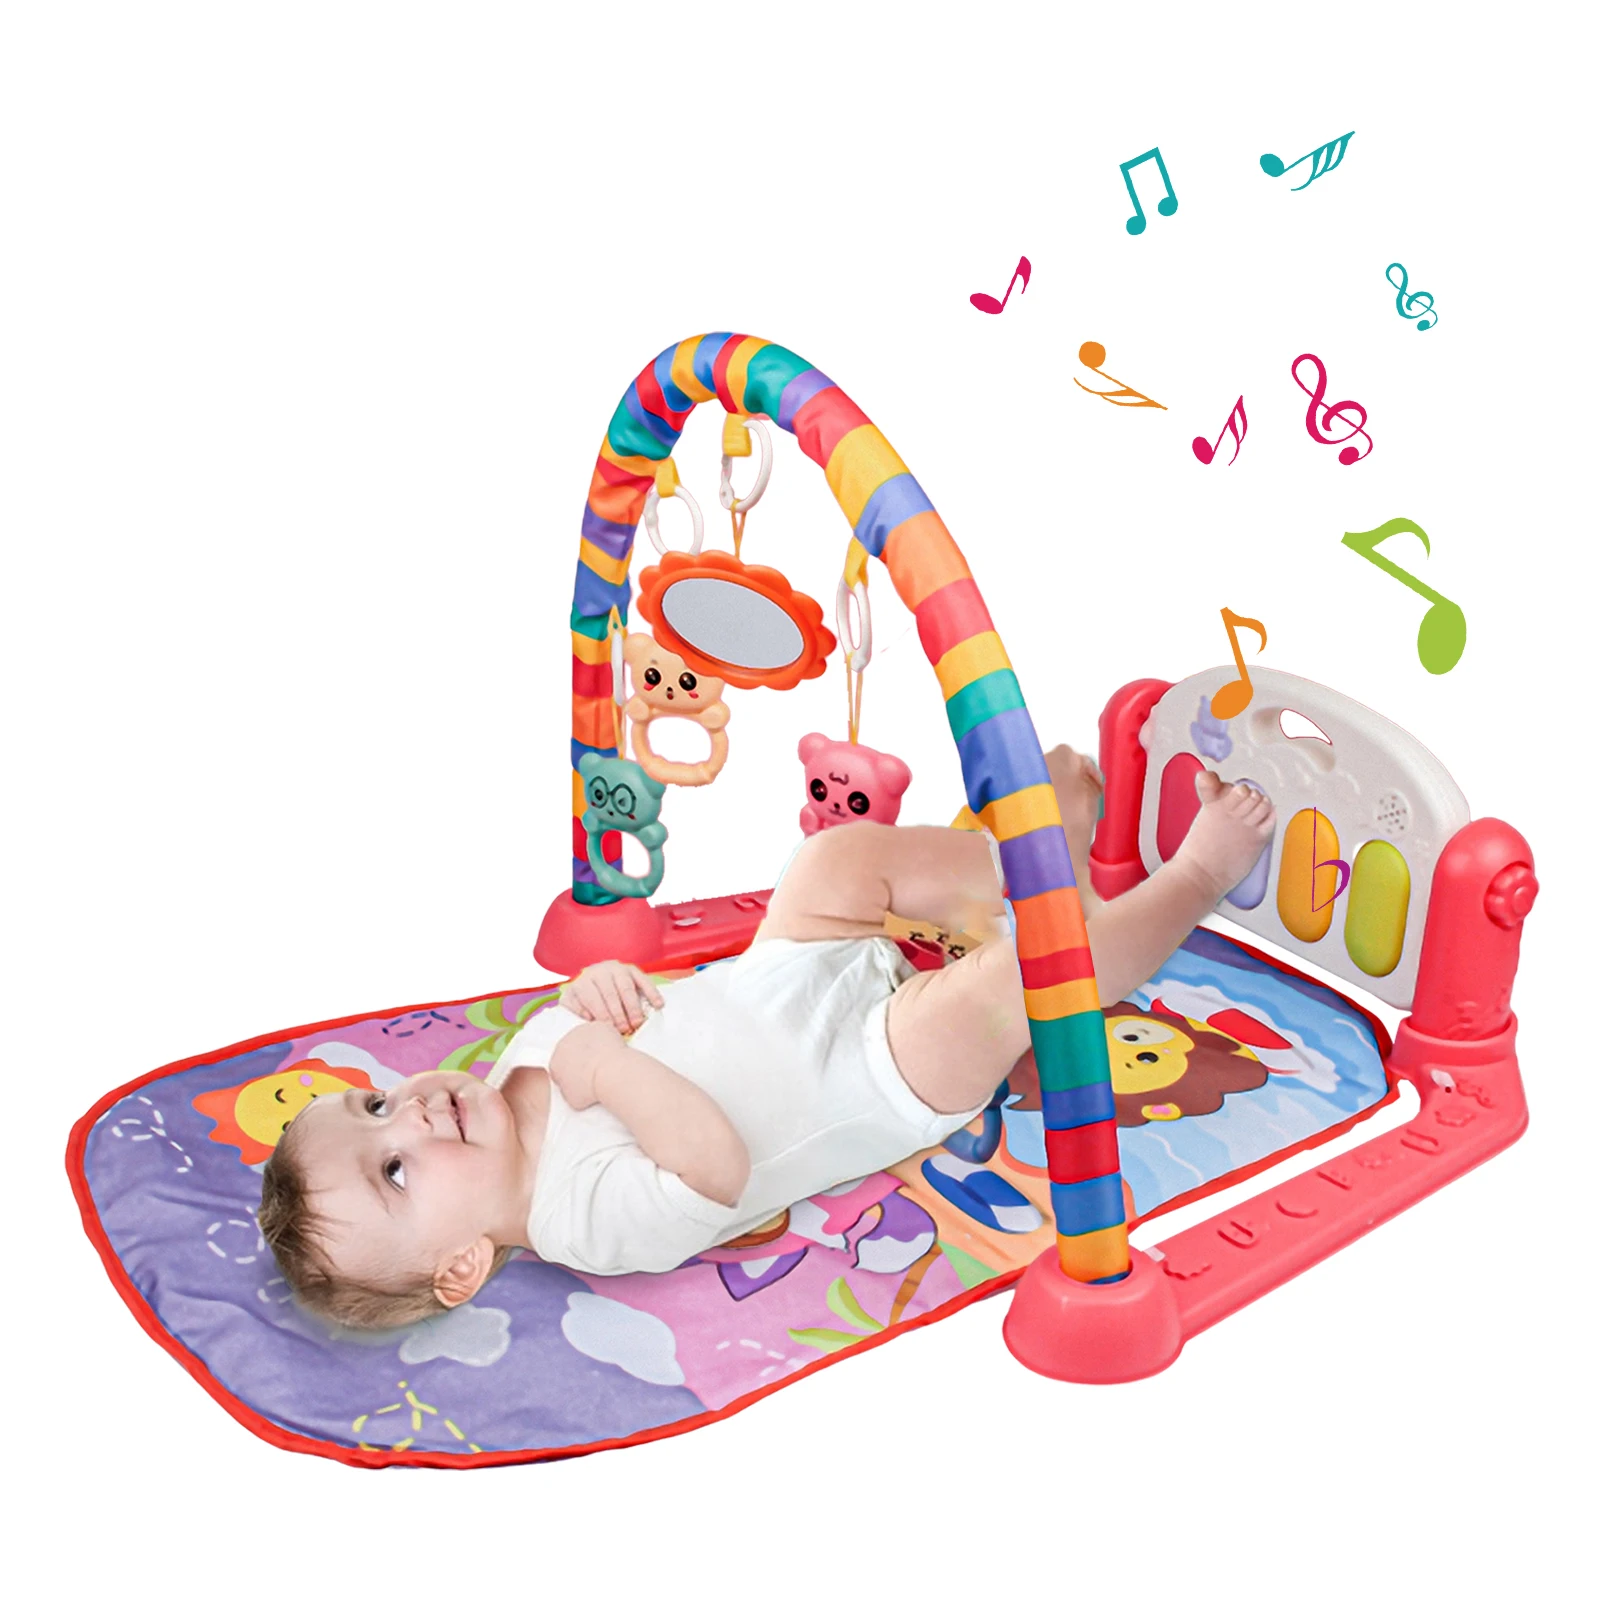 

Baby Play Mat Kick And Play Thickened Musical Activity Center Tummy Time Playmat Infant Toys For Infant Boys Girls Babies